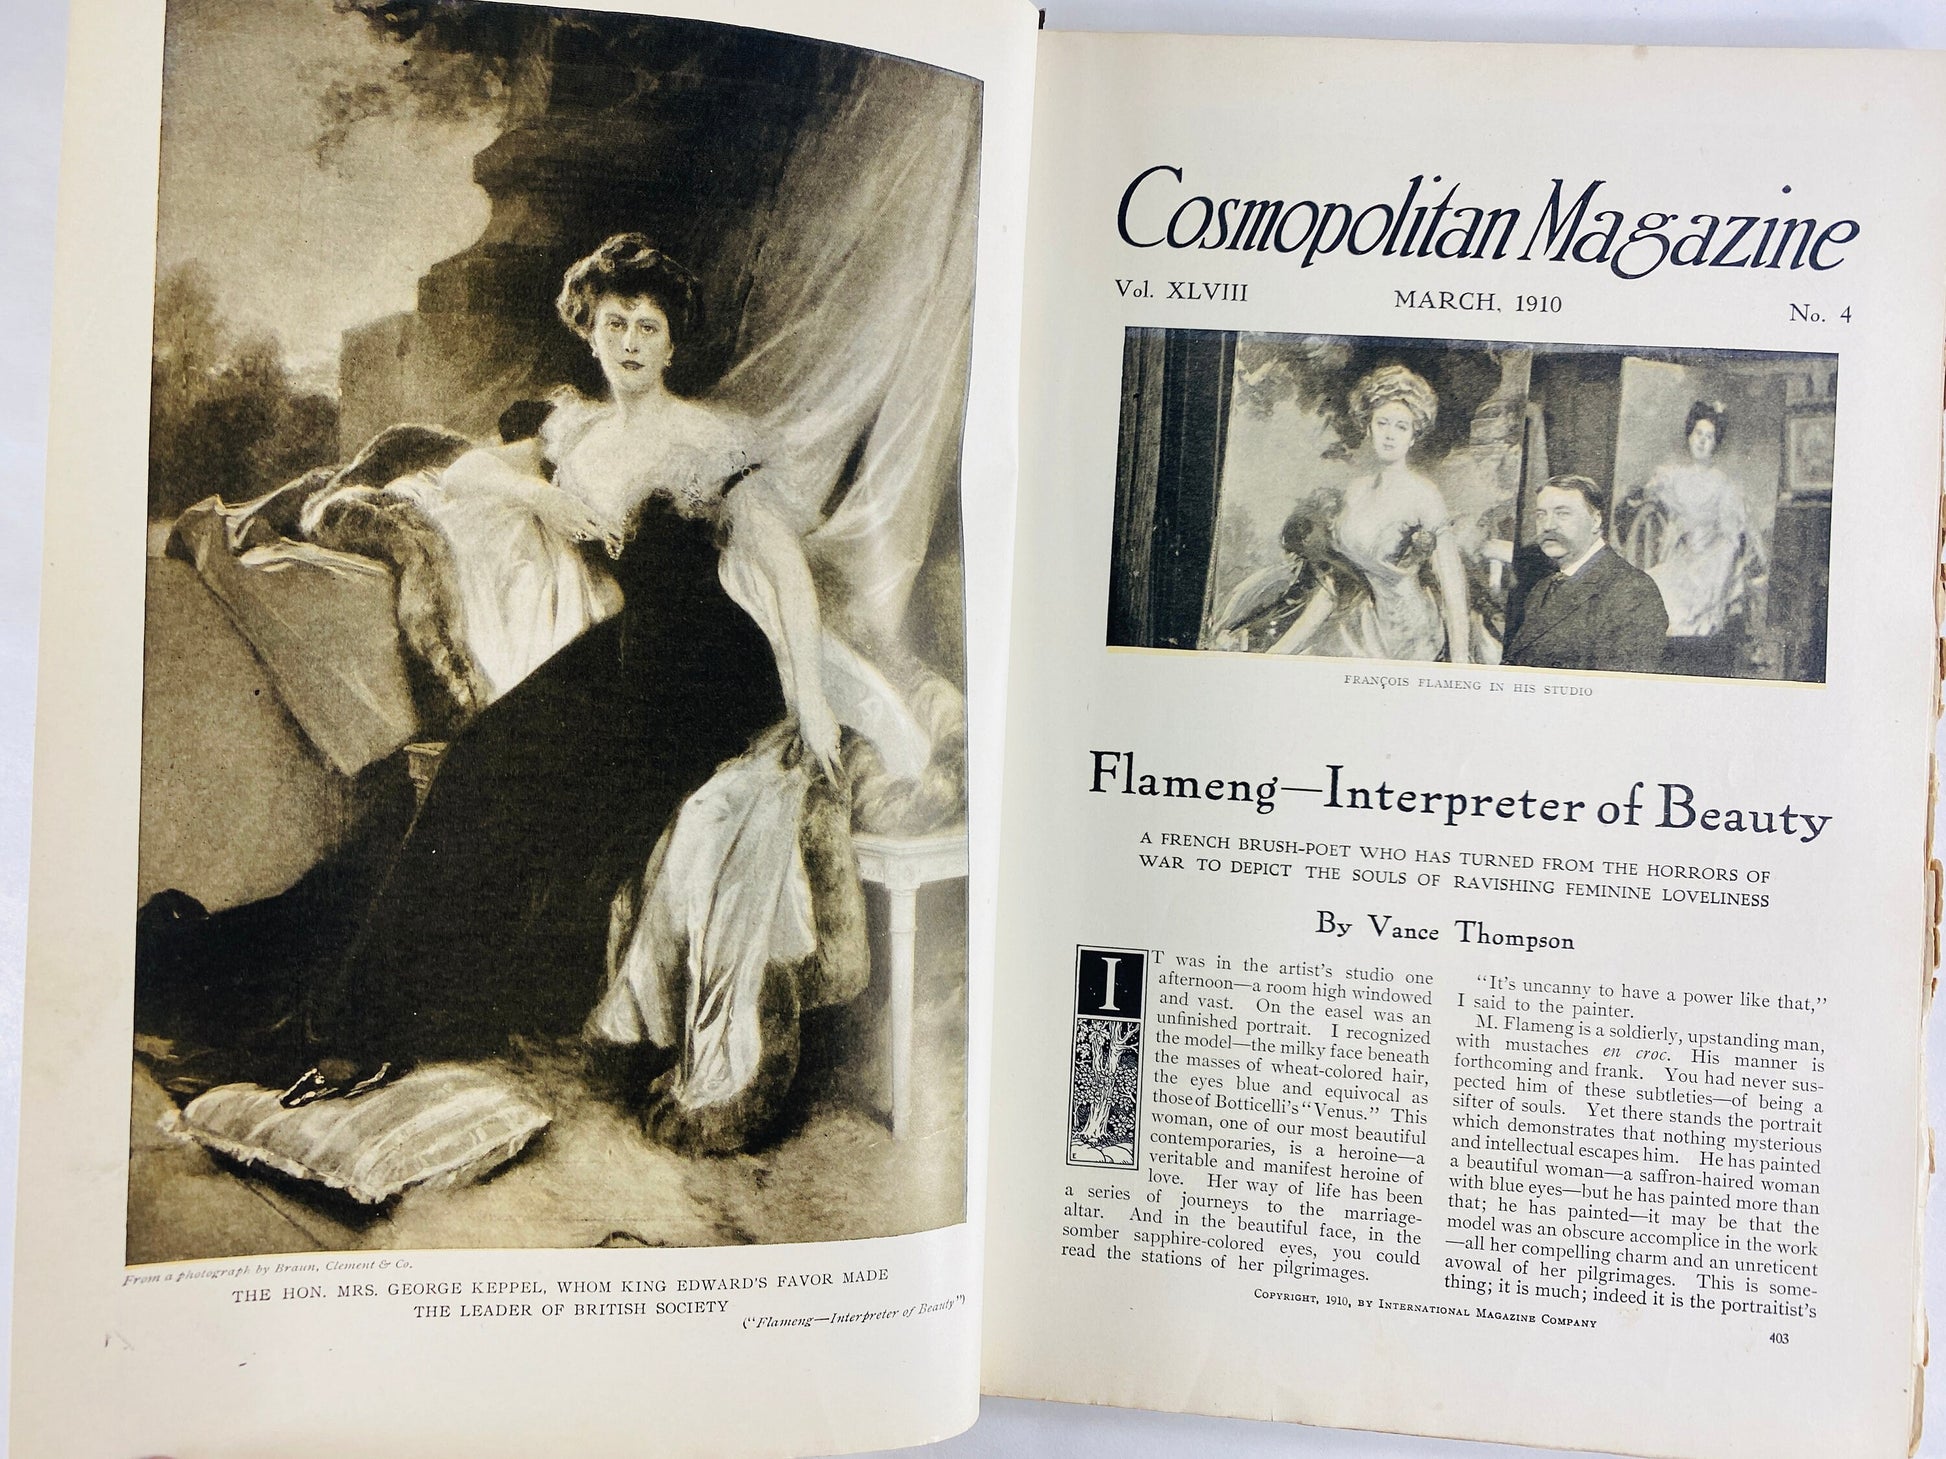 1910 vintage Cosmopolitan Magazine Vol 48 No 4 featuring Story of Charlemagne and Maligners of Mexico